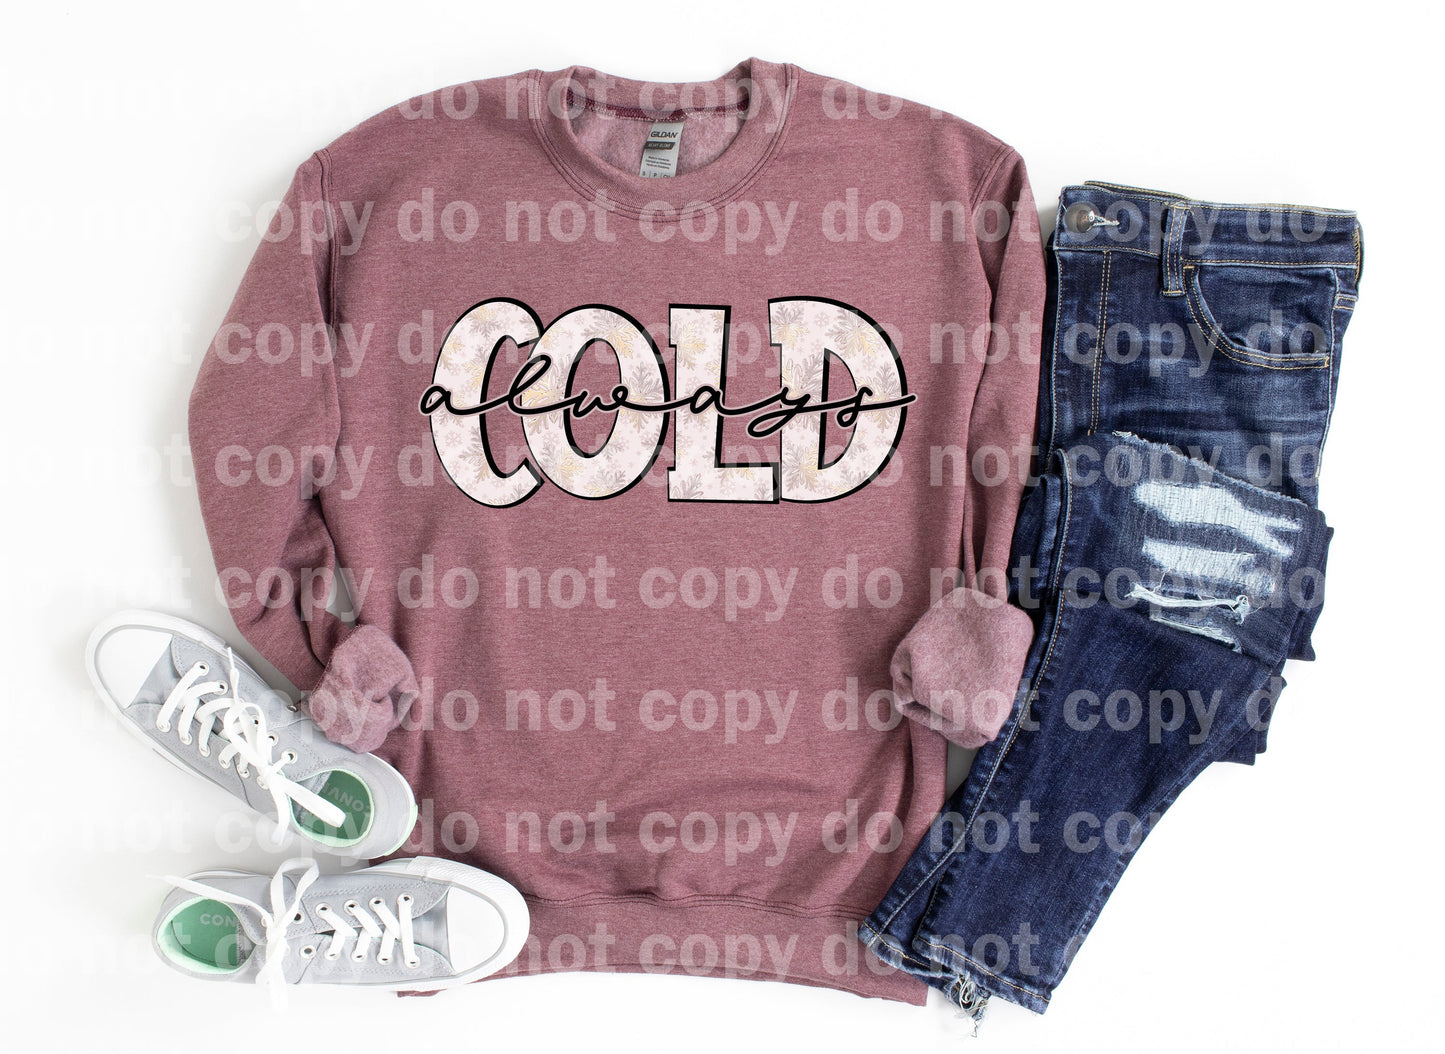 Always Cold Dream Print or Sublimation Print